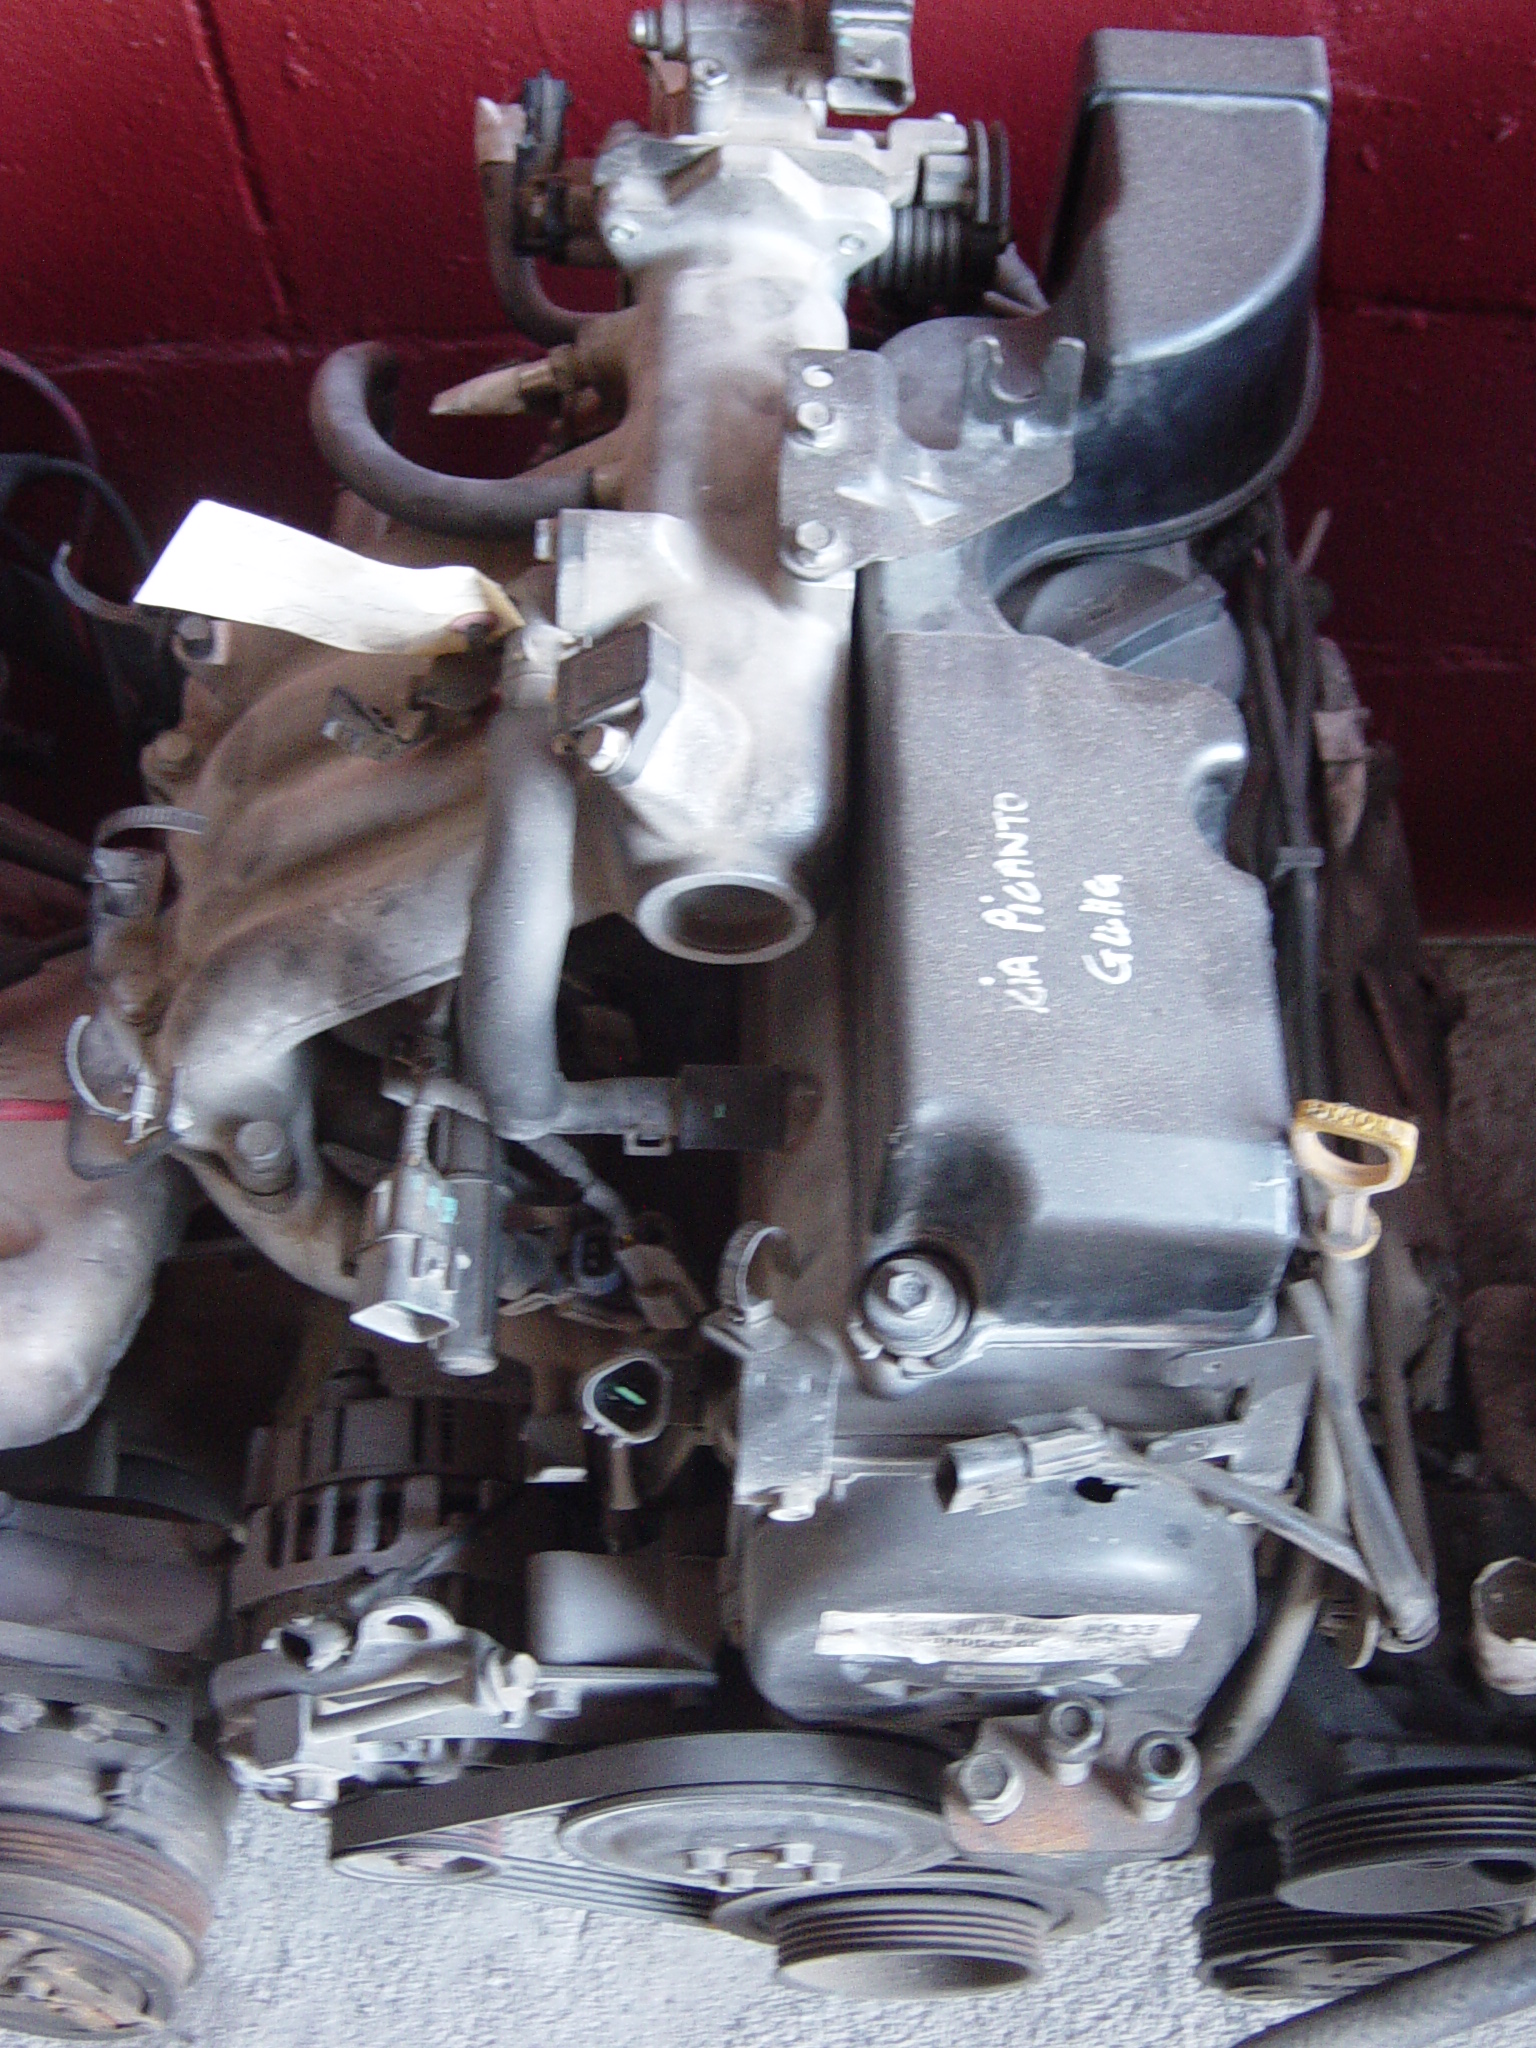 Kia Picanto G4hg 1 1 Engine For Sale Junk Mail